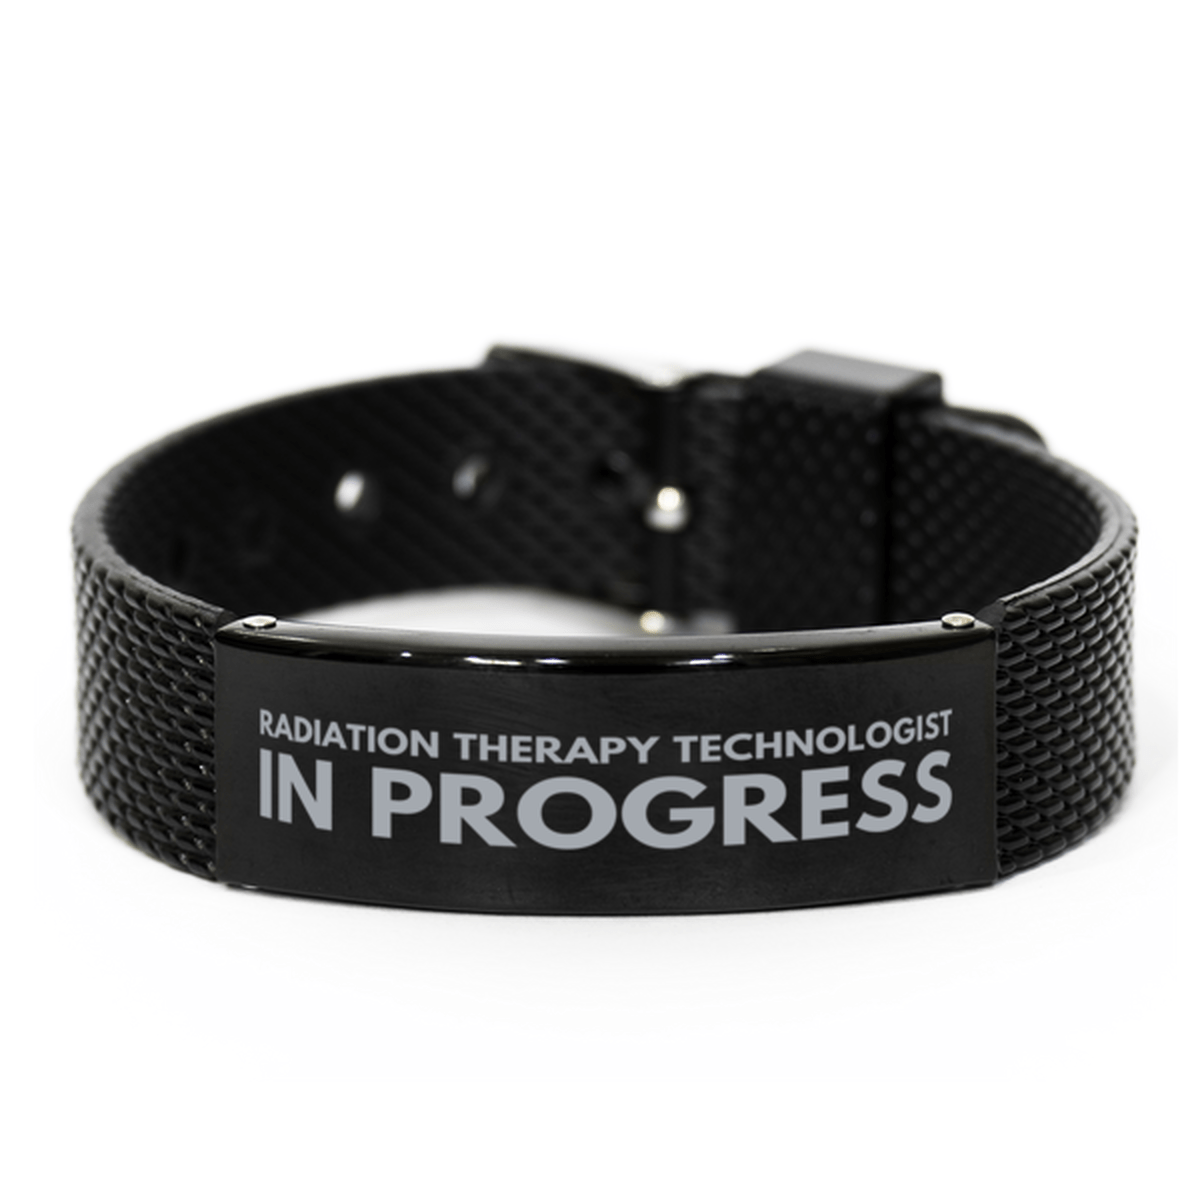 Inspirational Radiation Therapy Technologist Black Shark Mesh Bracelet, Radiation Therapy Technologist In Progress, Best Graduation Gifts for Students